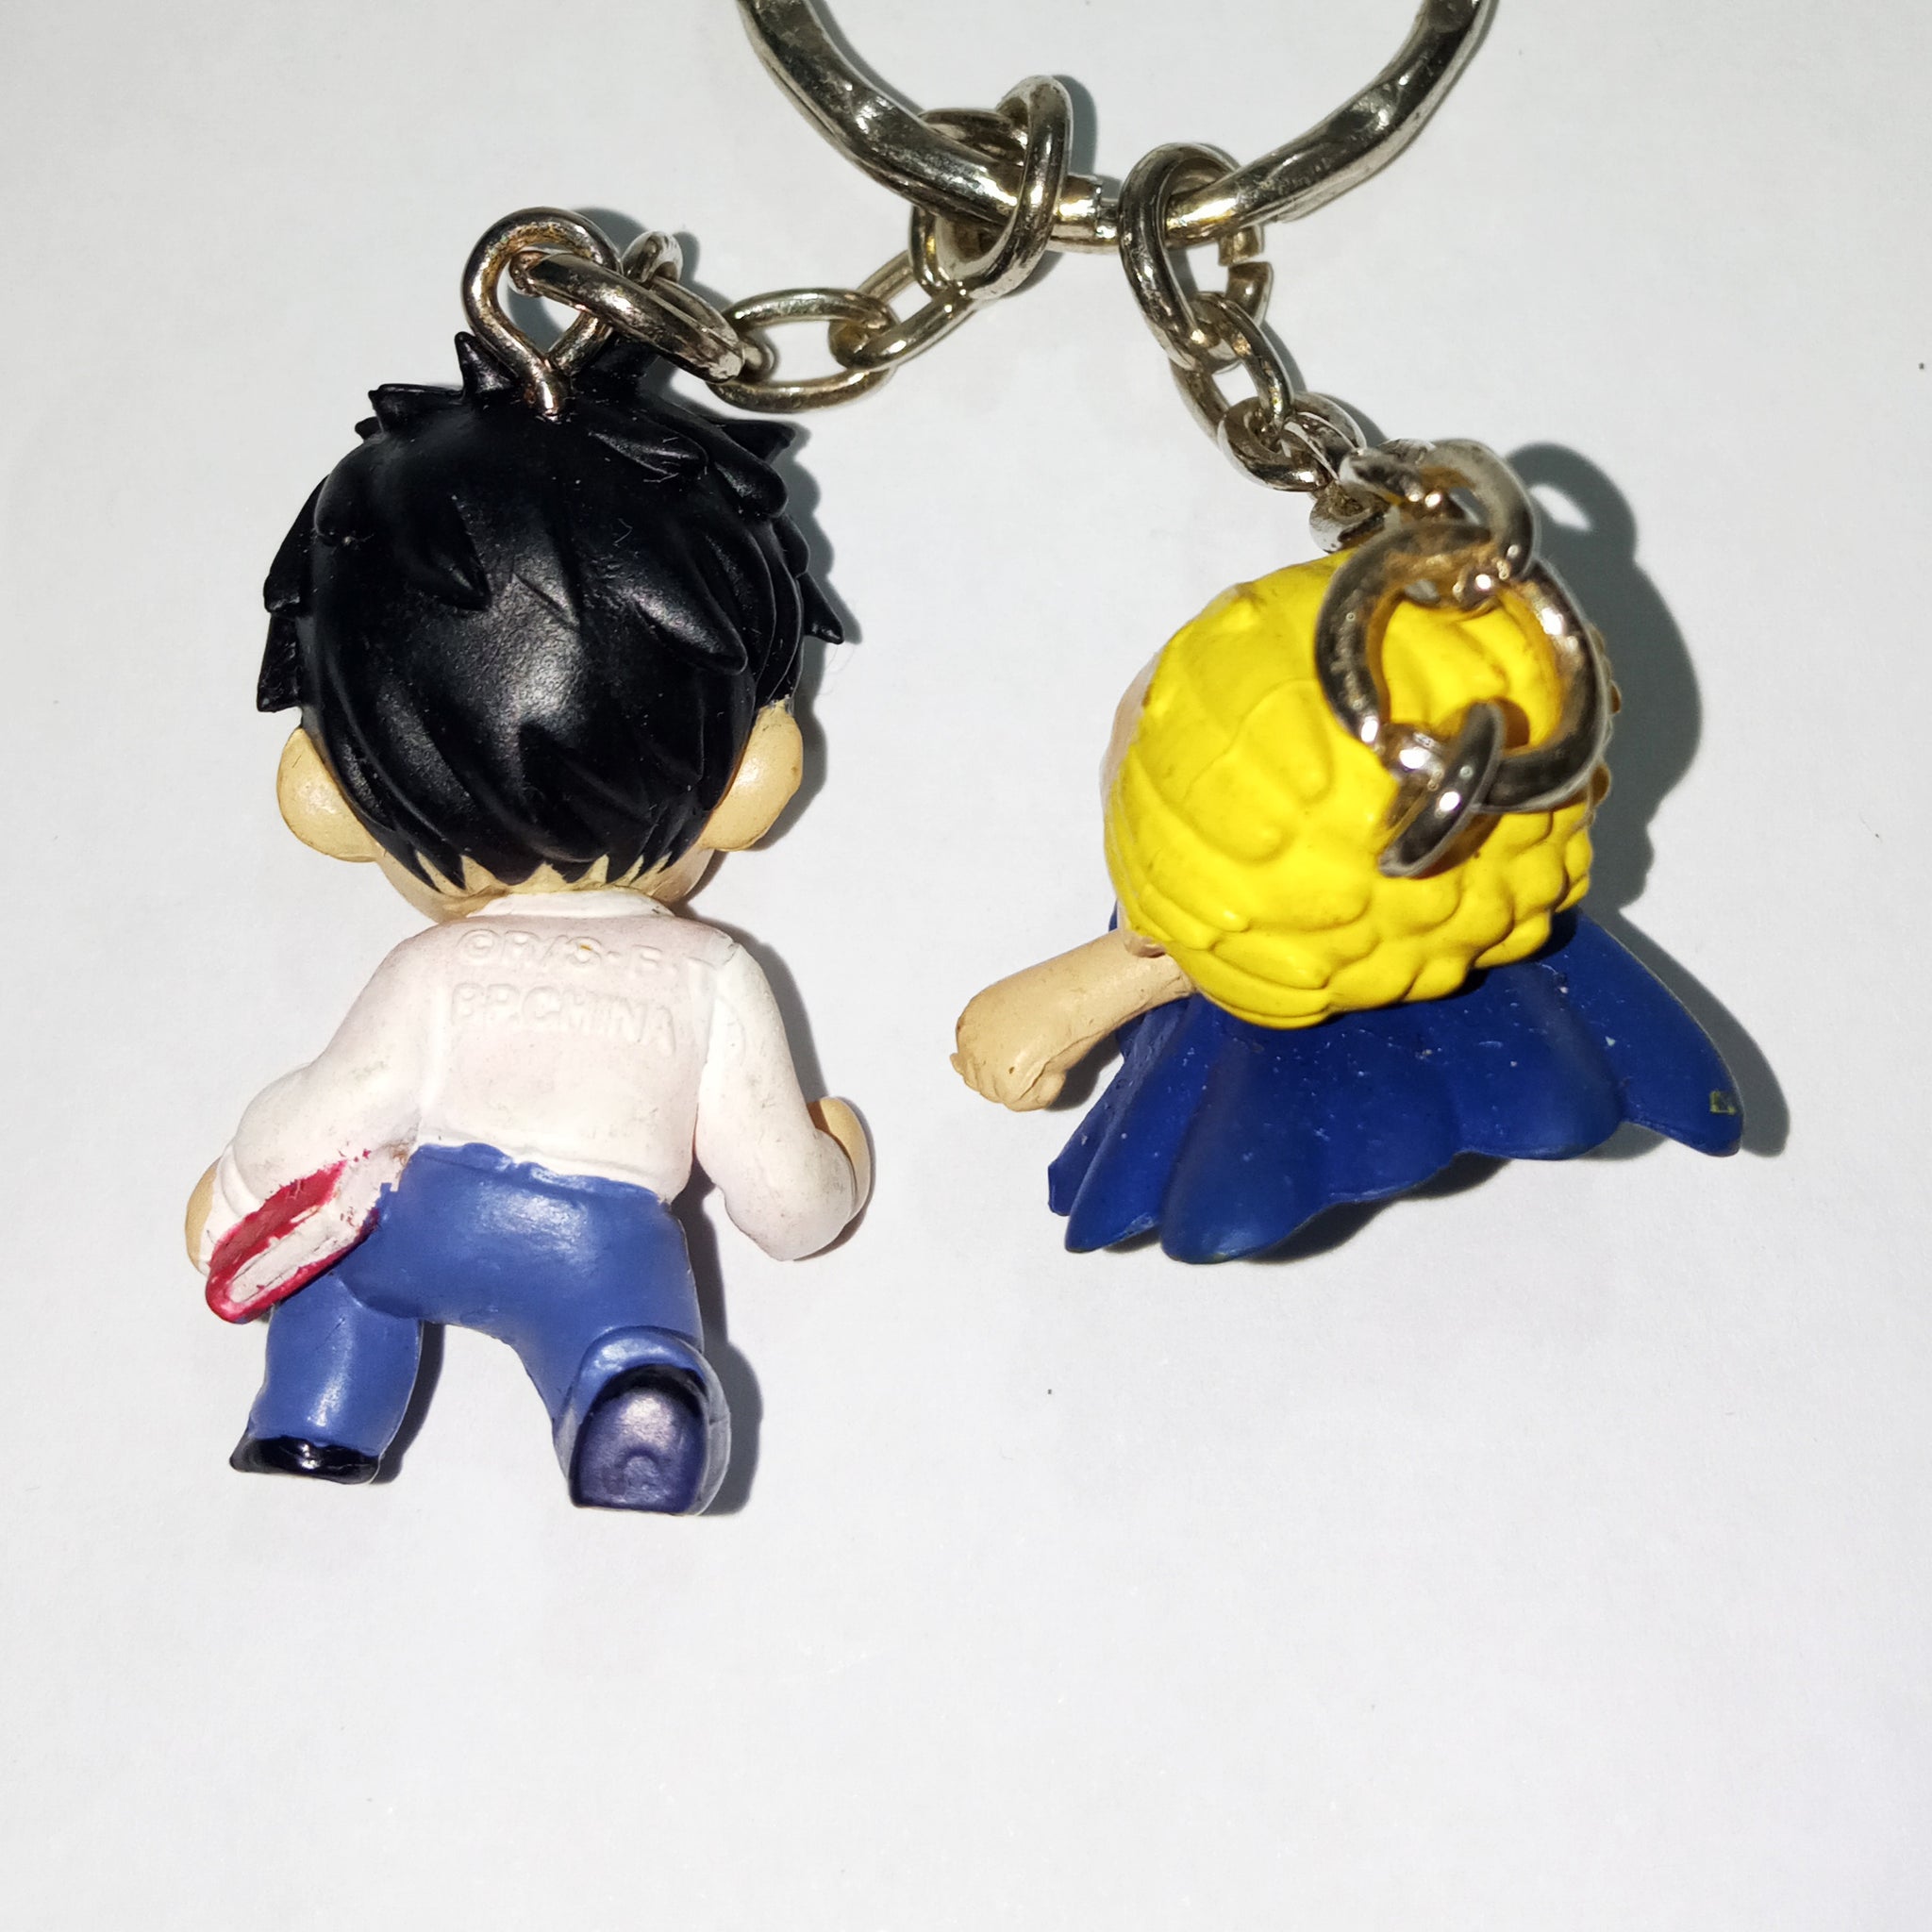 Buy Zatch Bell: Zatch and Kiyo Figures Online at Low Prices in